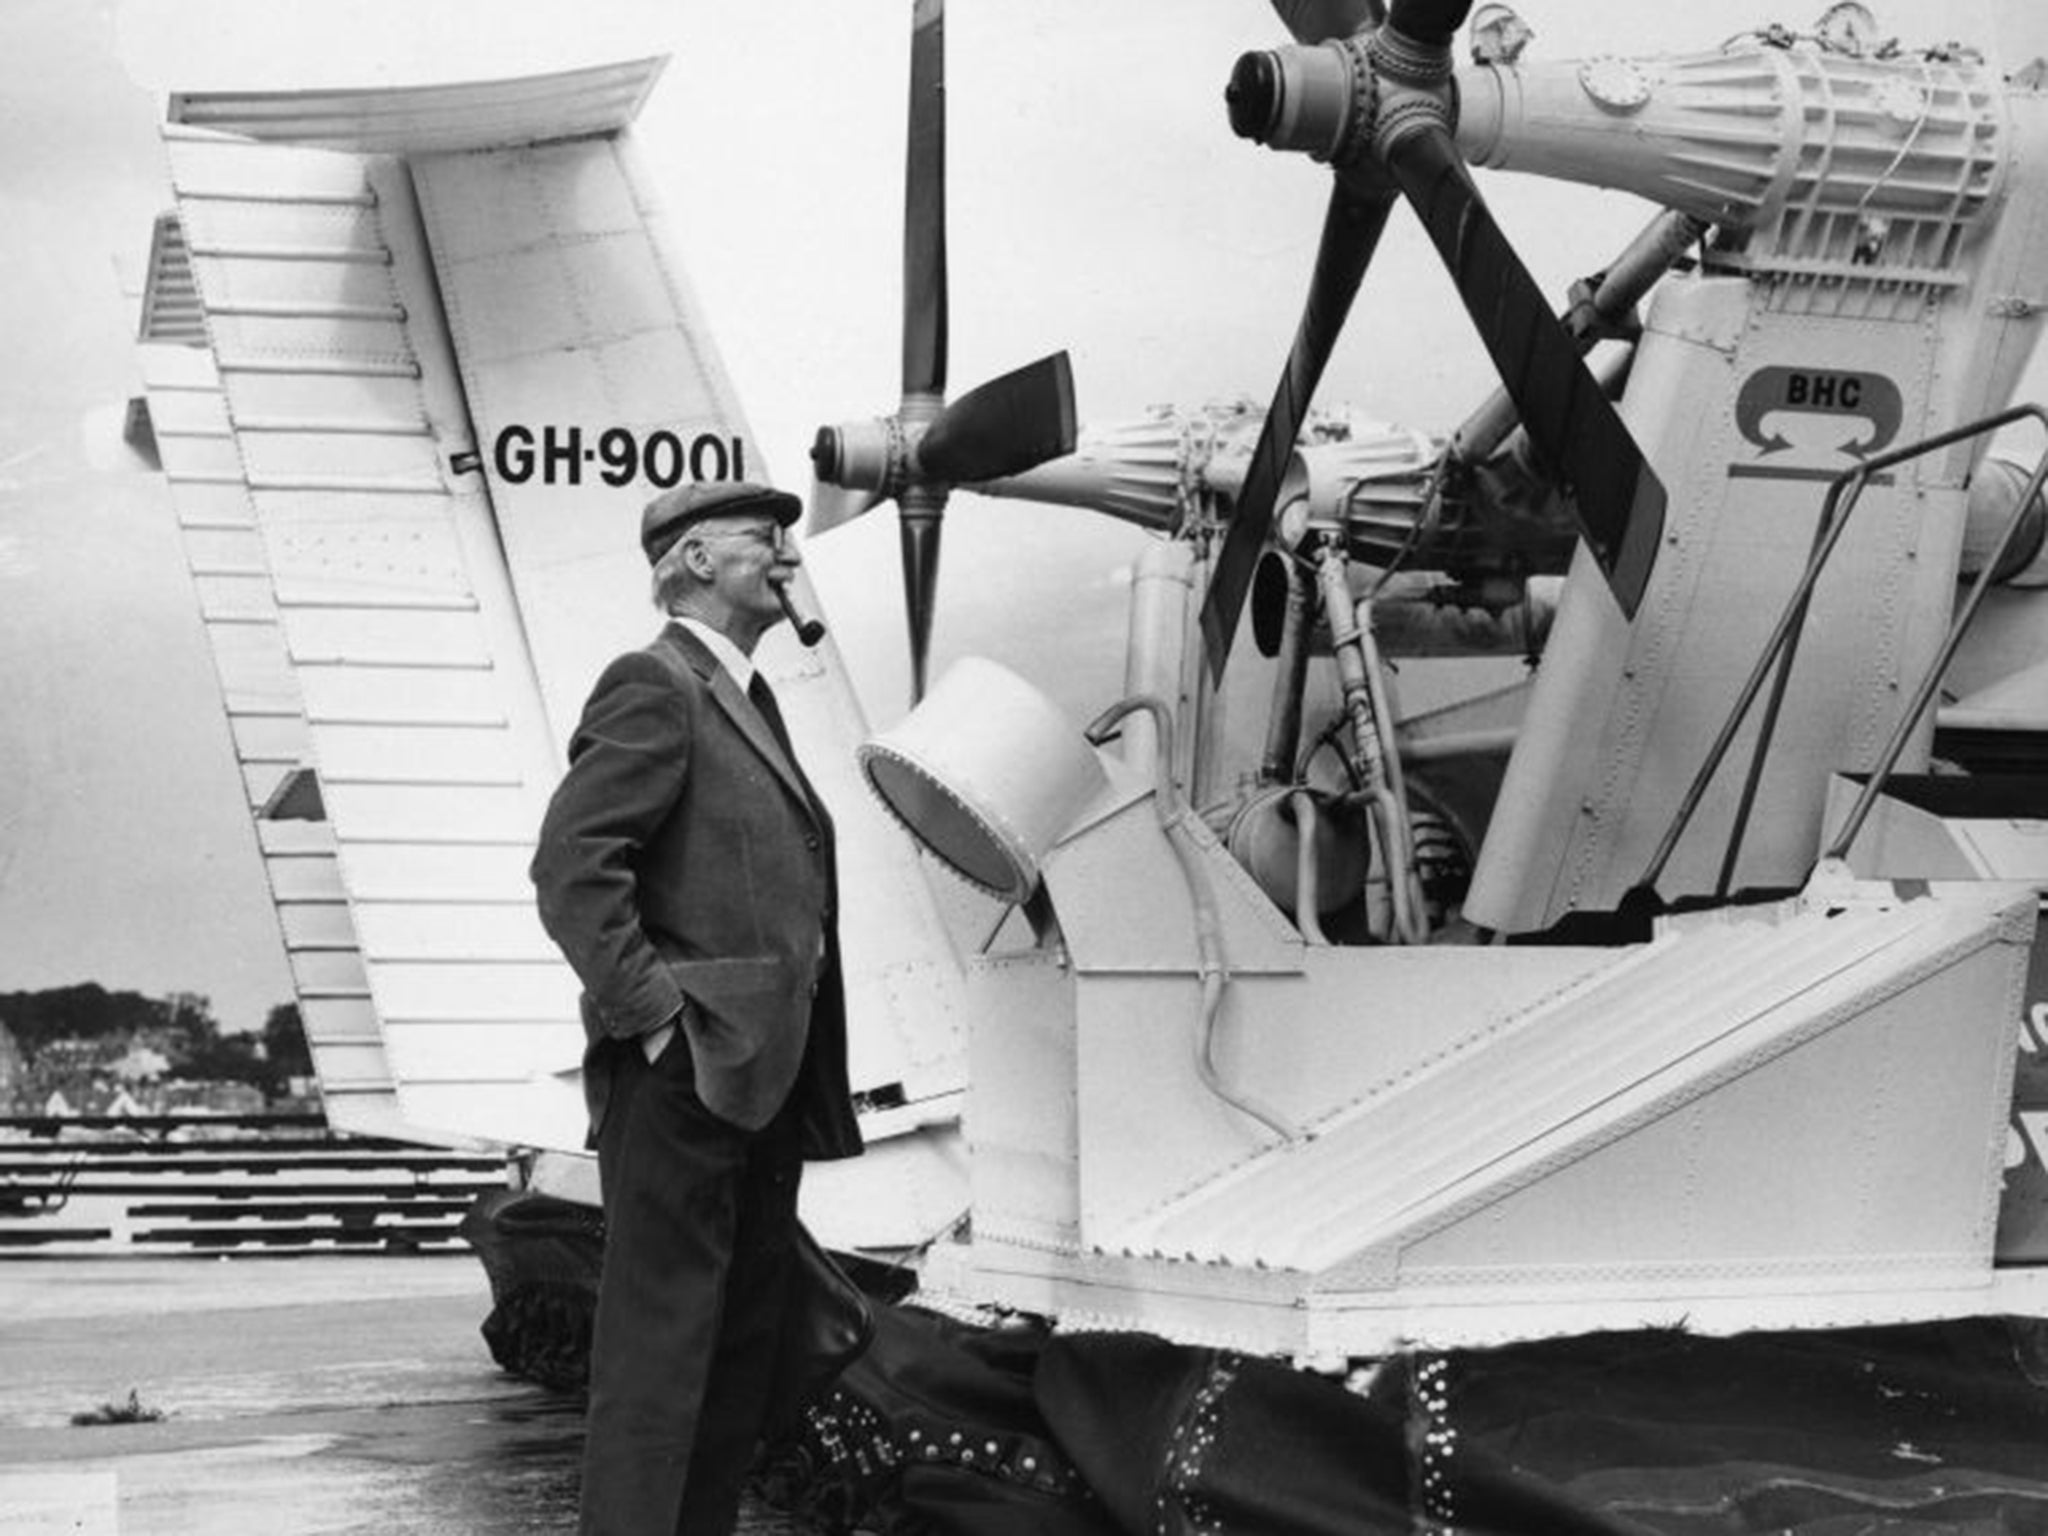 Christopher Cockerell, the inventor of the hovercraft, inspecting the new twin propeller in 1973